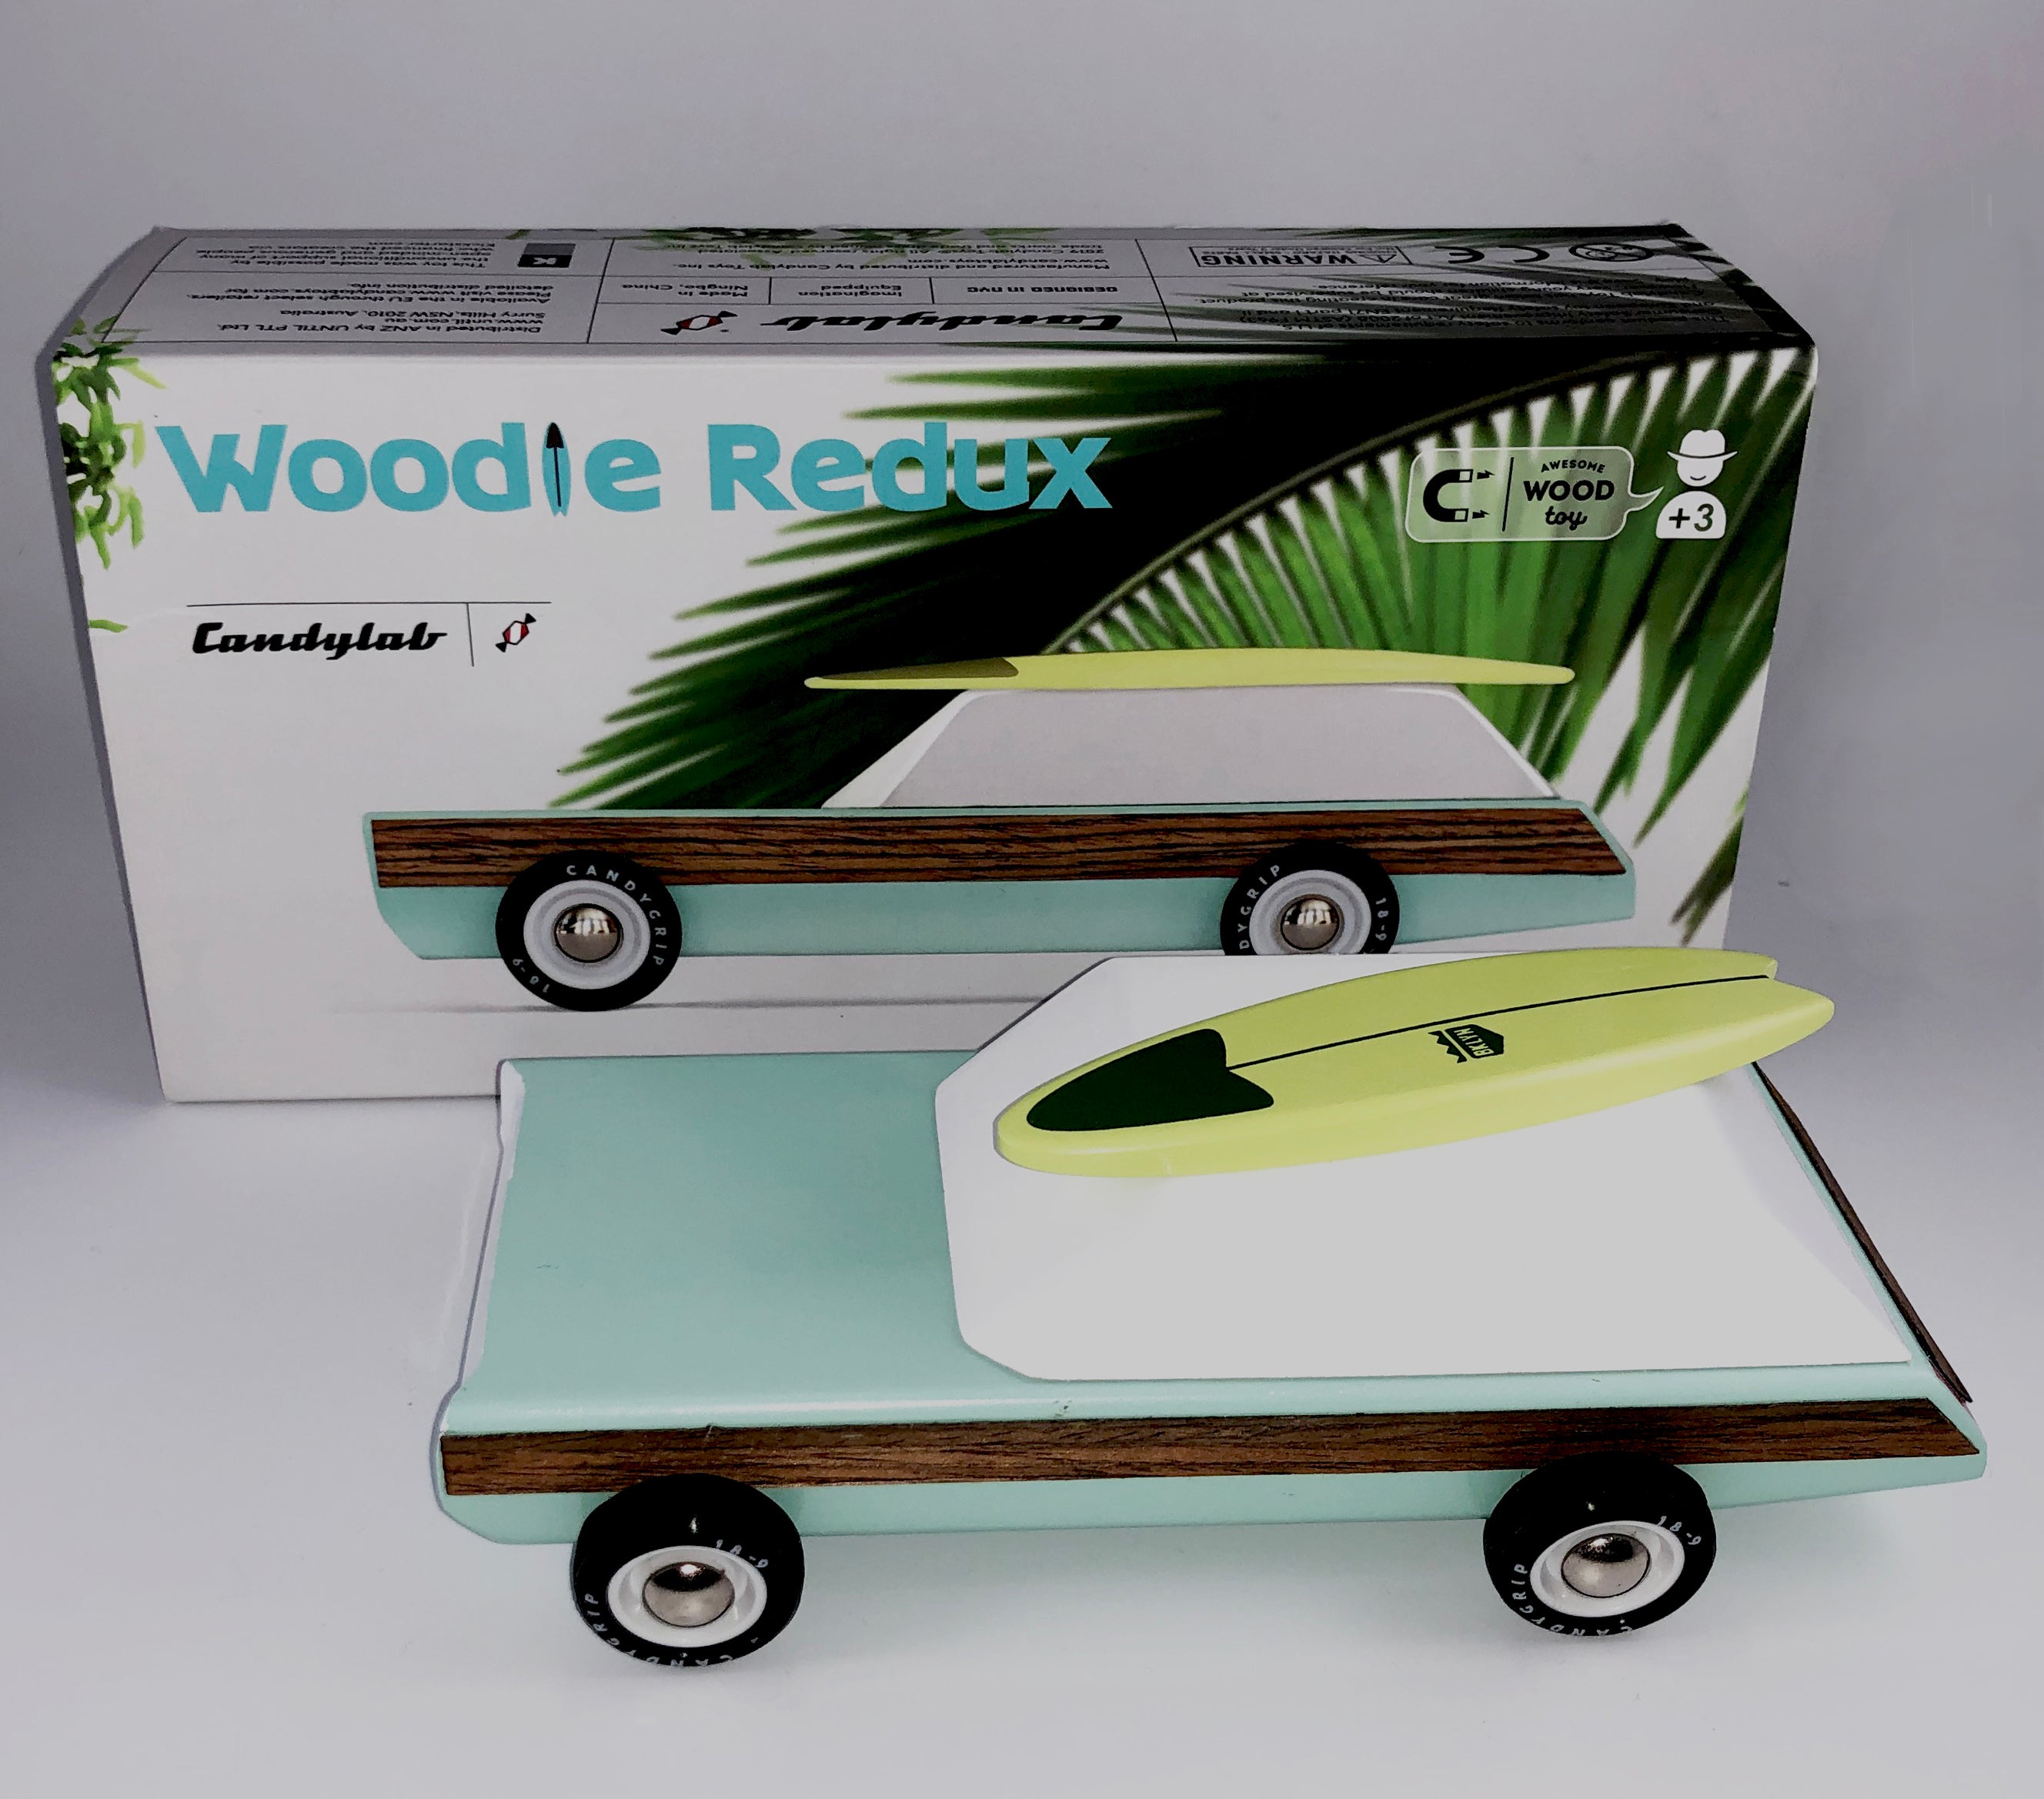 With real wood veneer  sides, this toy is more real than its original inspiration. And it won't smell of leaded gasoline, sun-cracked dashboard and old wet beach shorts.. 